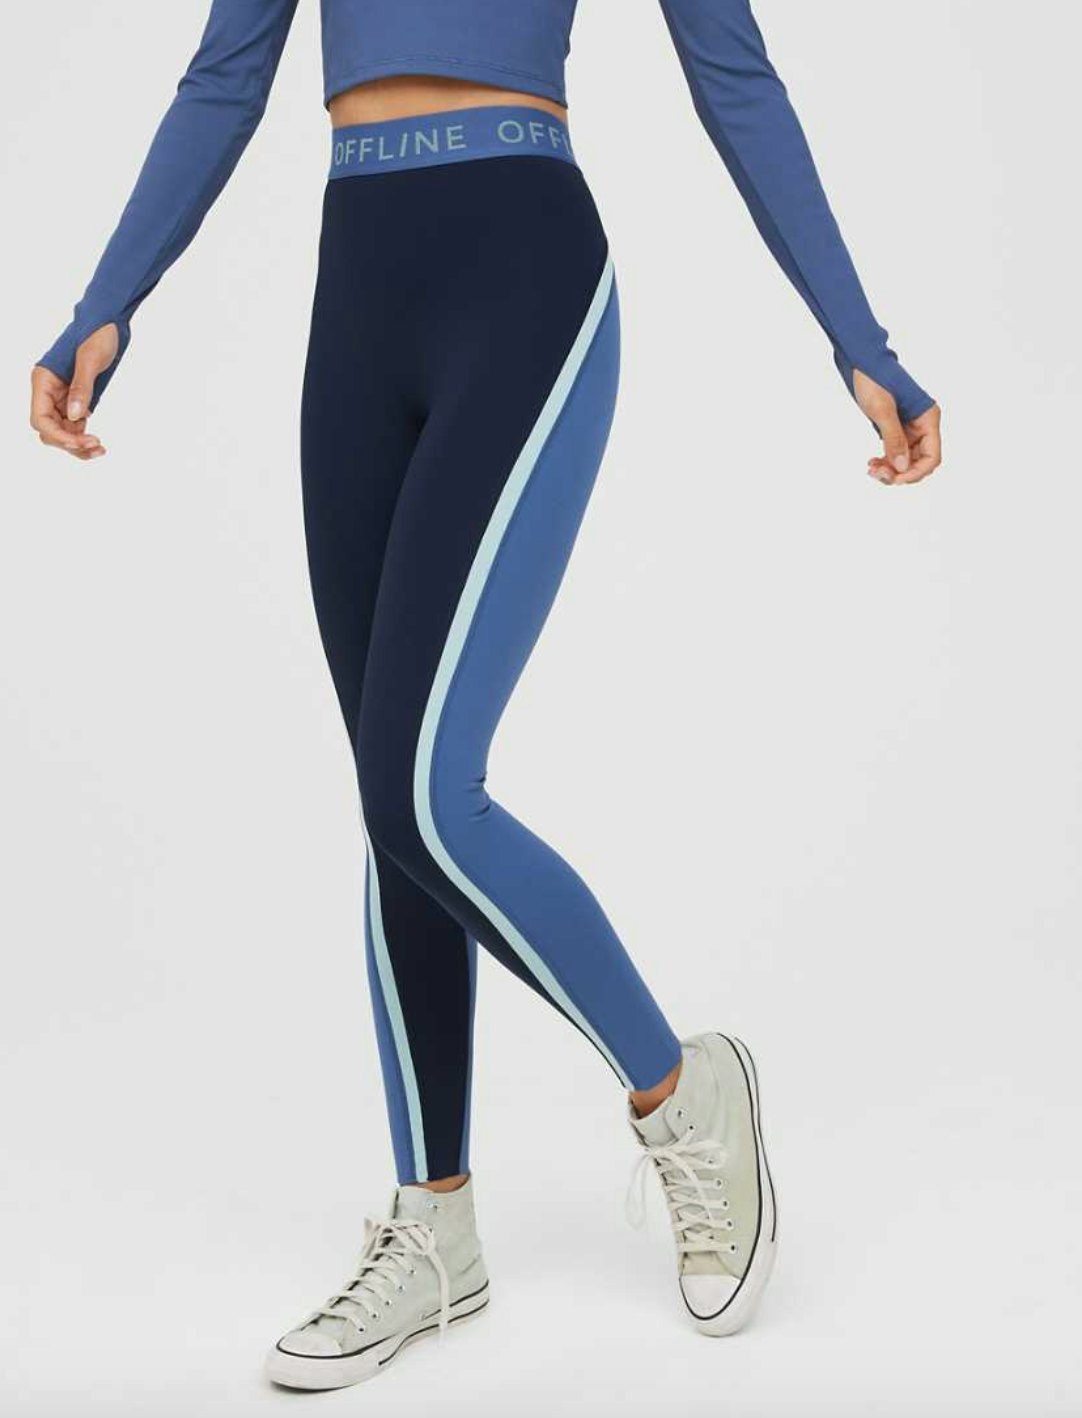 Are Aerie Leggings Good For Working Out